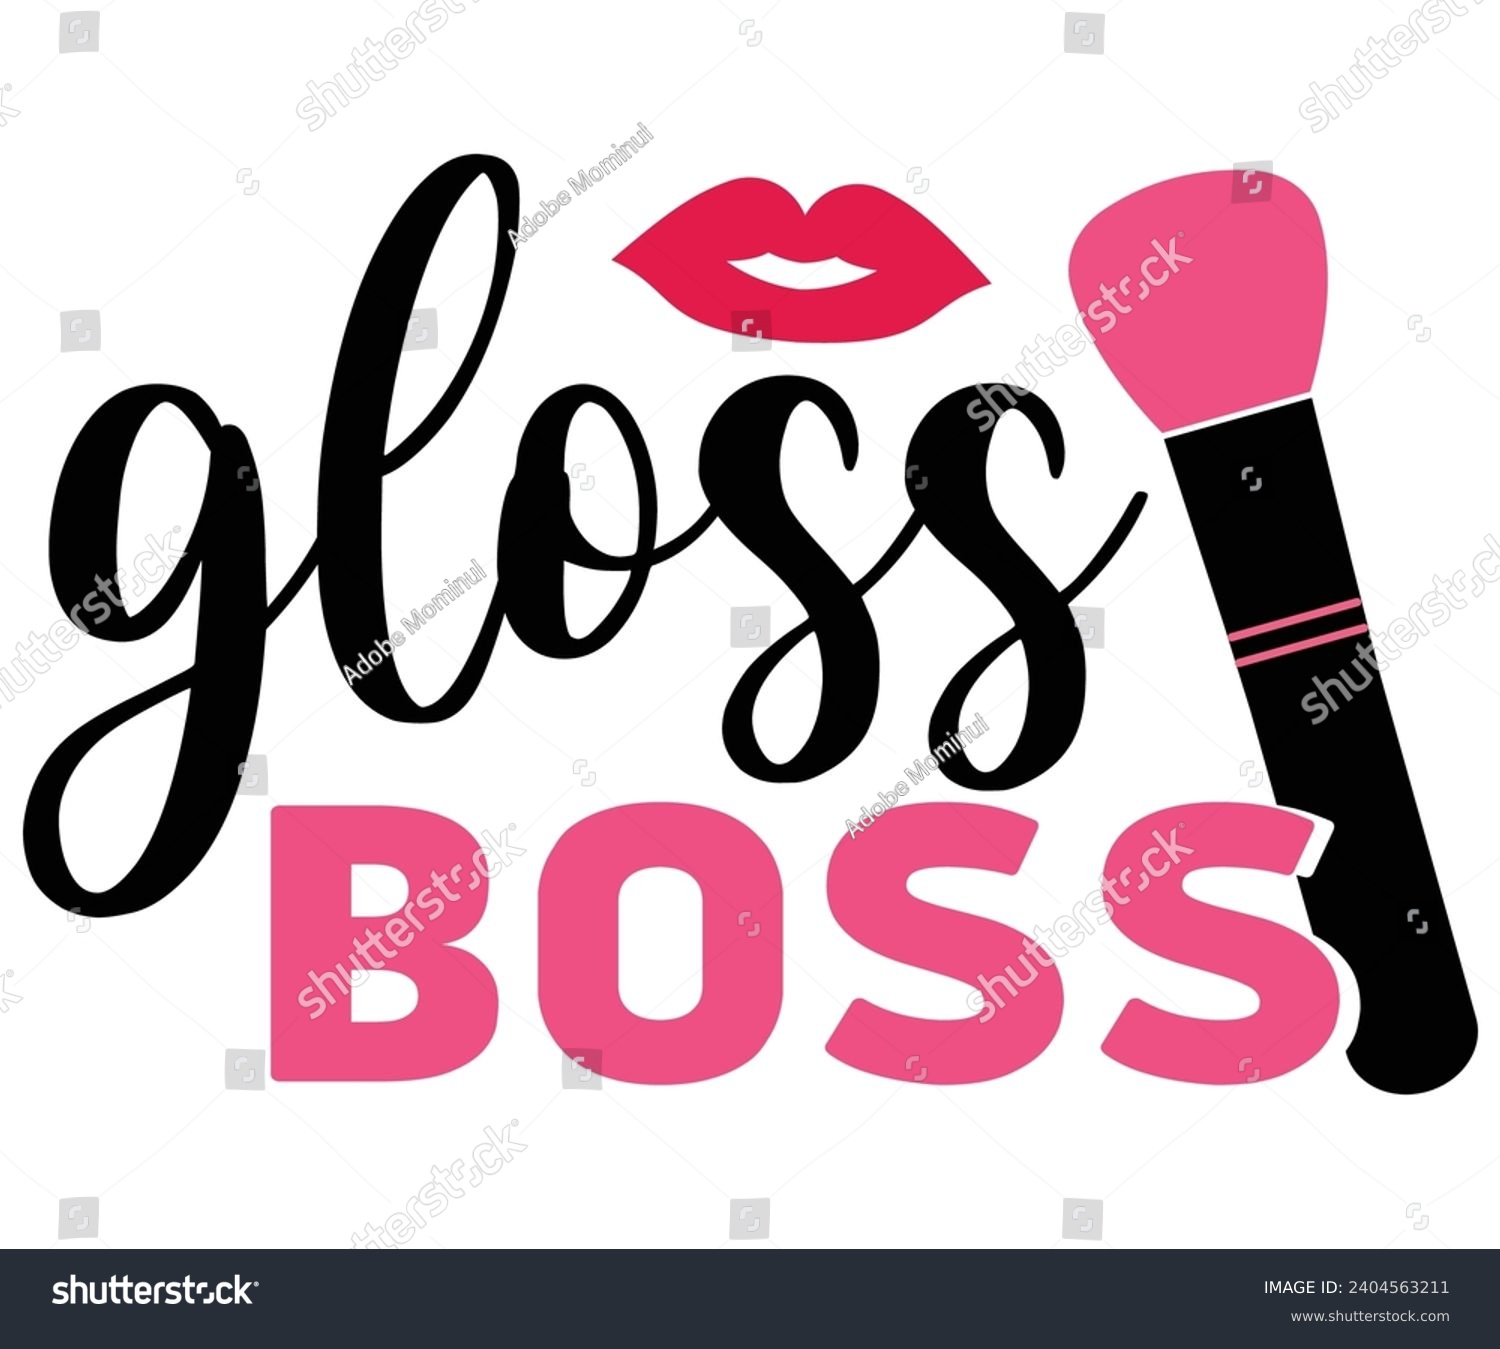 SVG of Gloss Boss Svg,Happy Boss Day svg,Boss Saying Quotes,Boss Day T-shirt,Gift for Boss,Great Jobs,Happy Bosses Day t-shirt,Girl Boss Shirt,Motivational Boss,Cut File,Circut And Silhouette,Commercial  svg